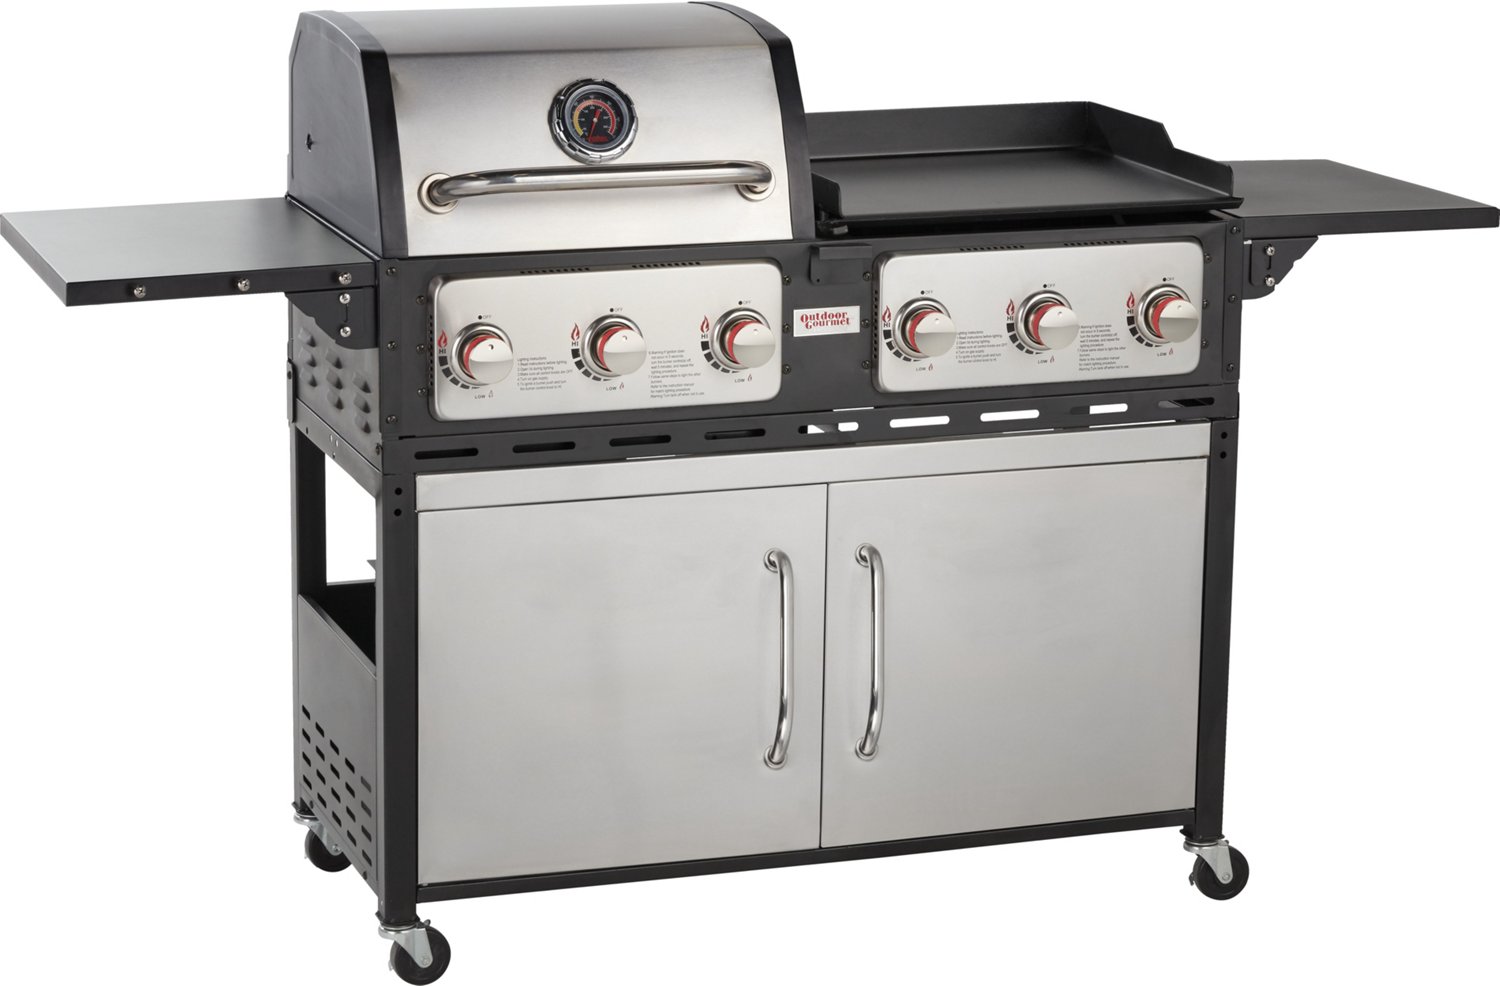 Outdoor Built In Grill And Griddle Combo | lupon.gov.ph